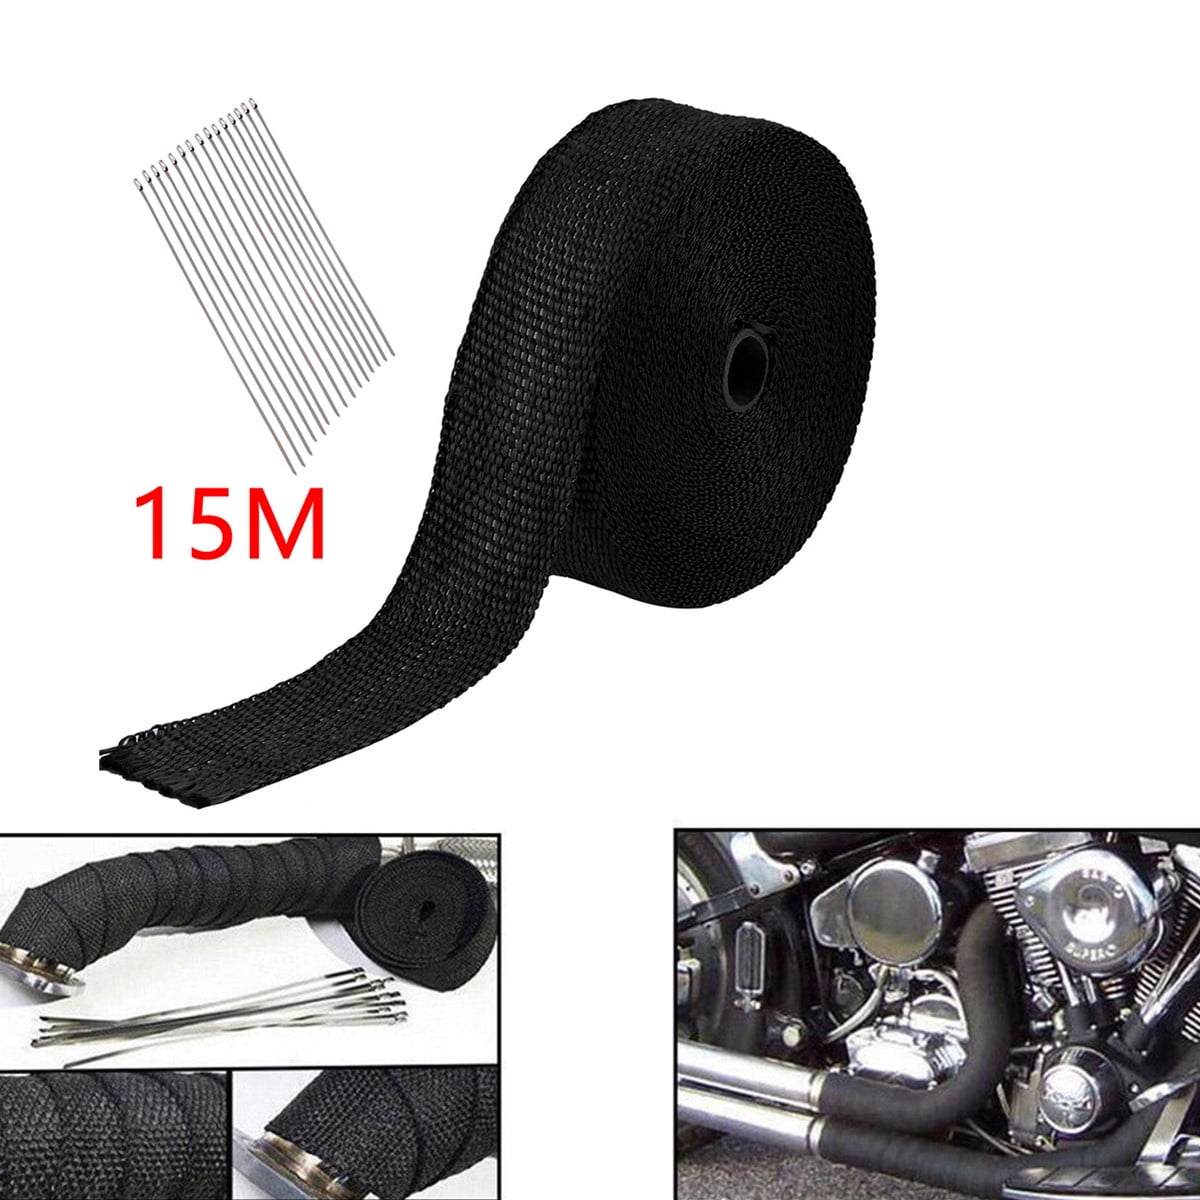 Exhaust Wrap Black 1 x 16 Roll for Motorcycle Fiberglass Heat Shield Tape with 4PC Stainless Ties black